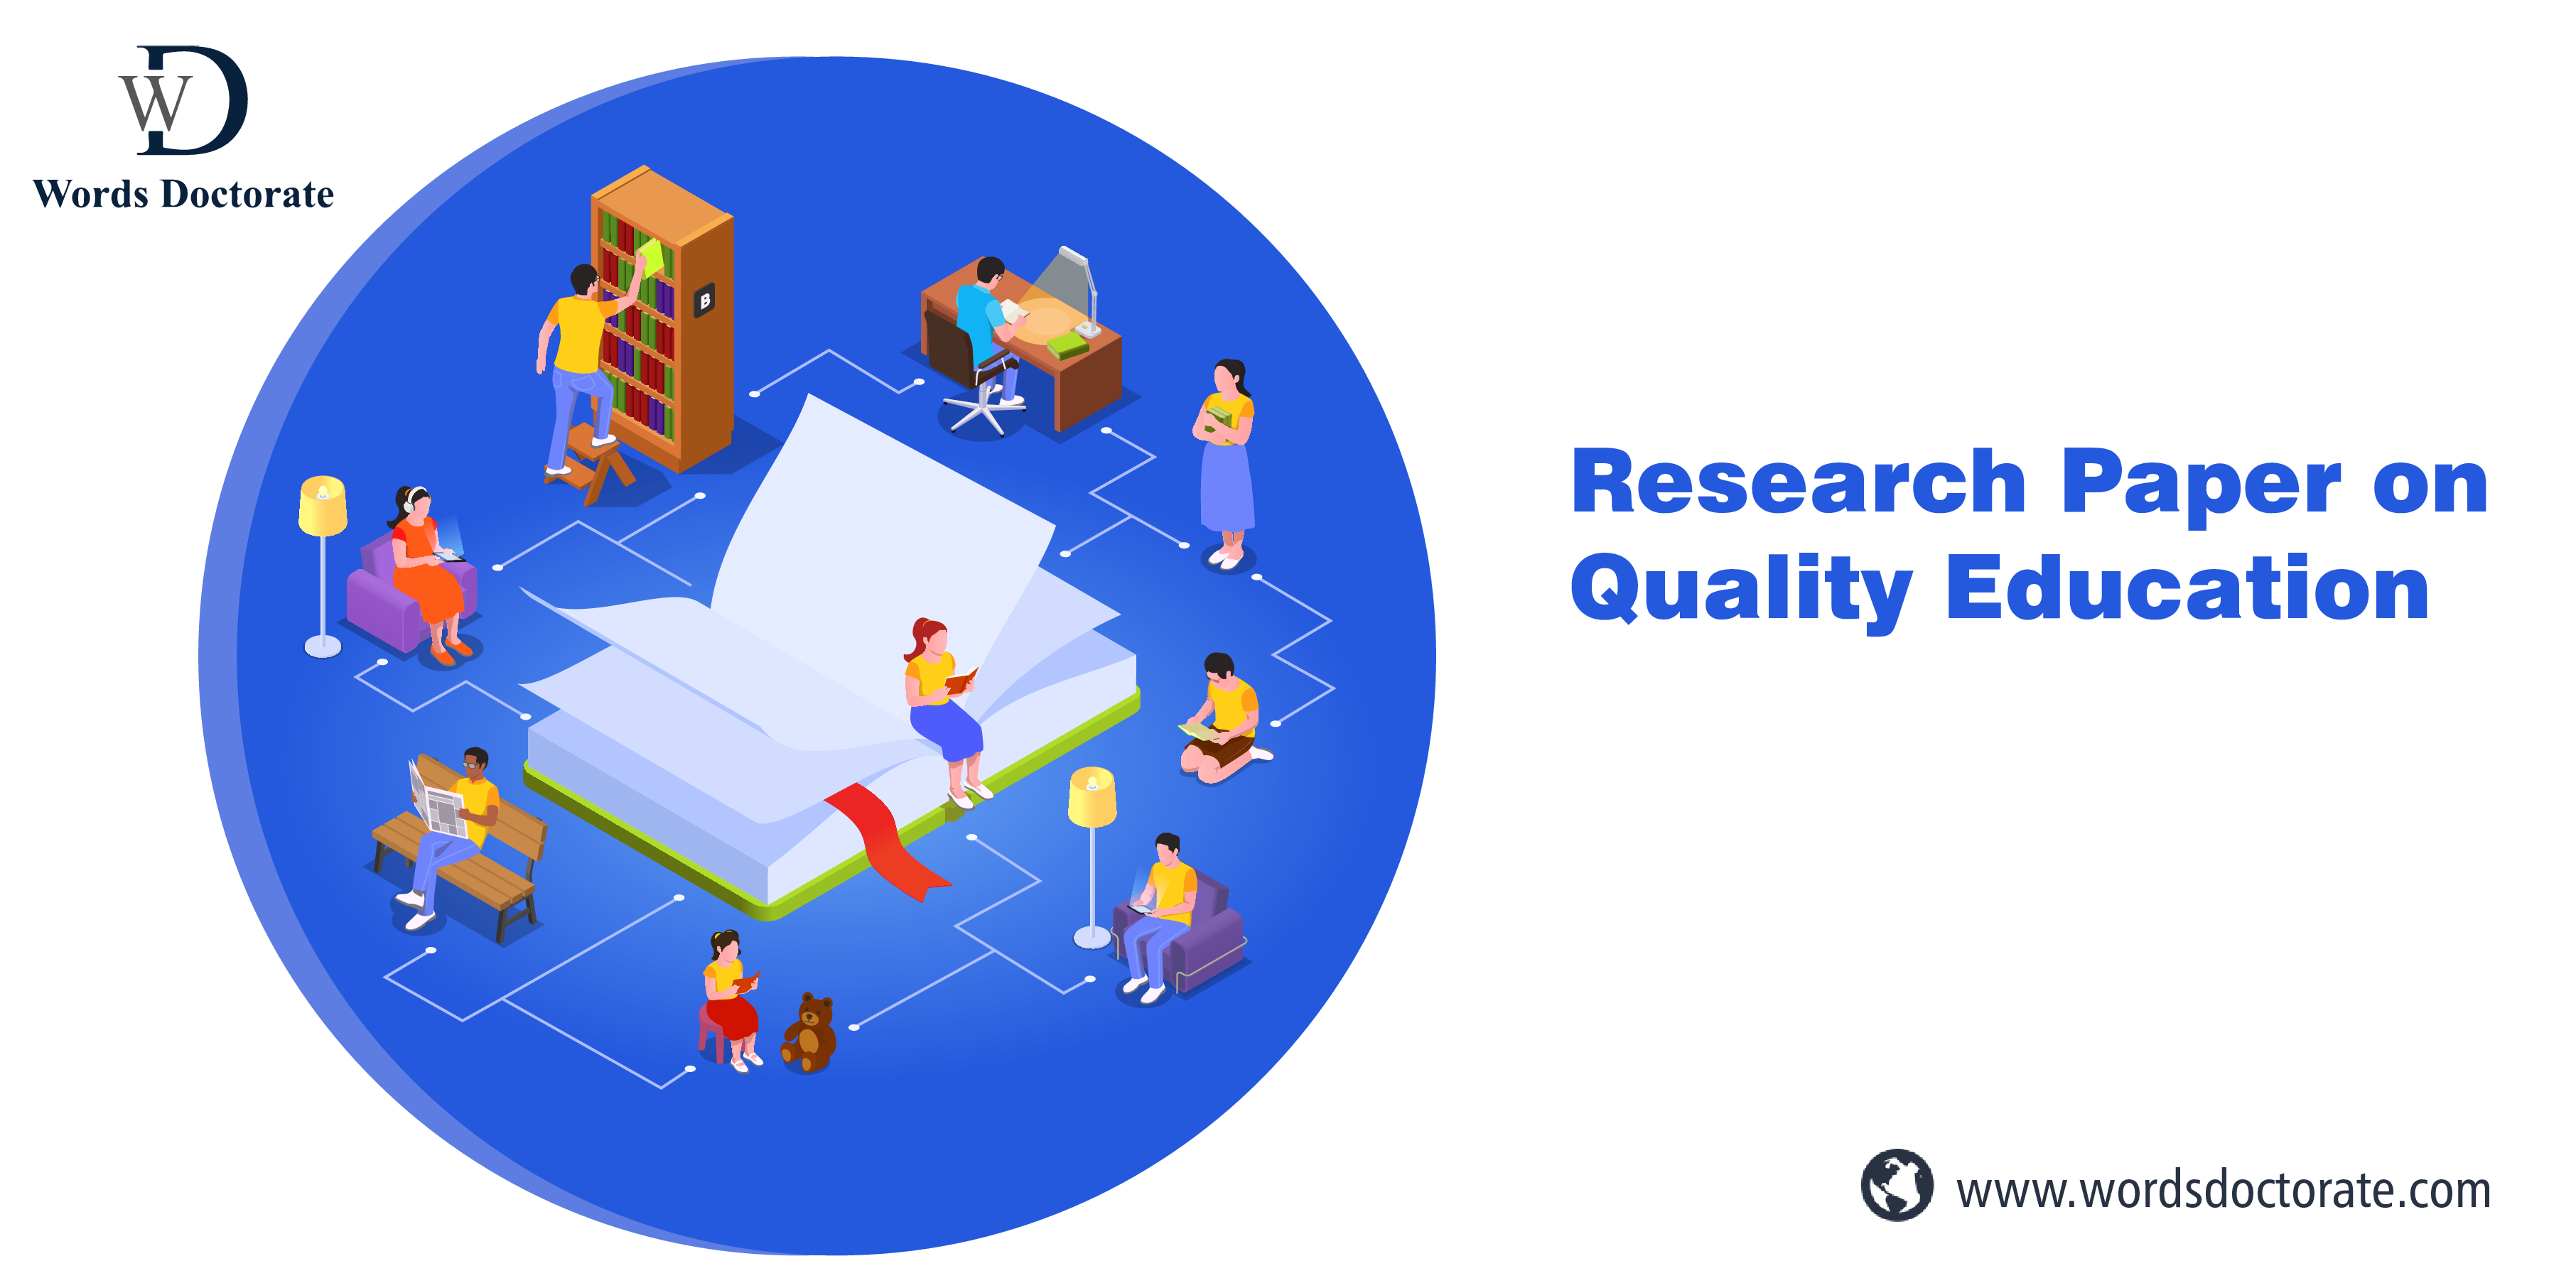 Research Paper on Quality Education